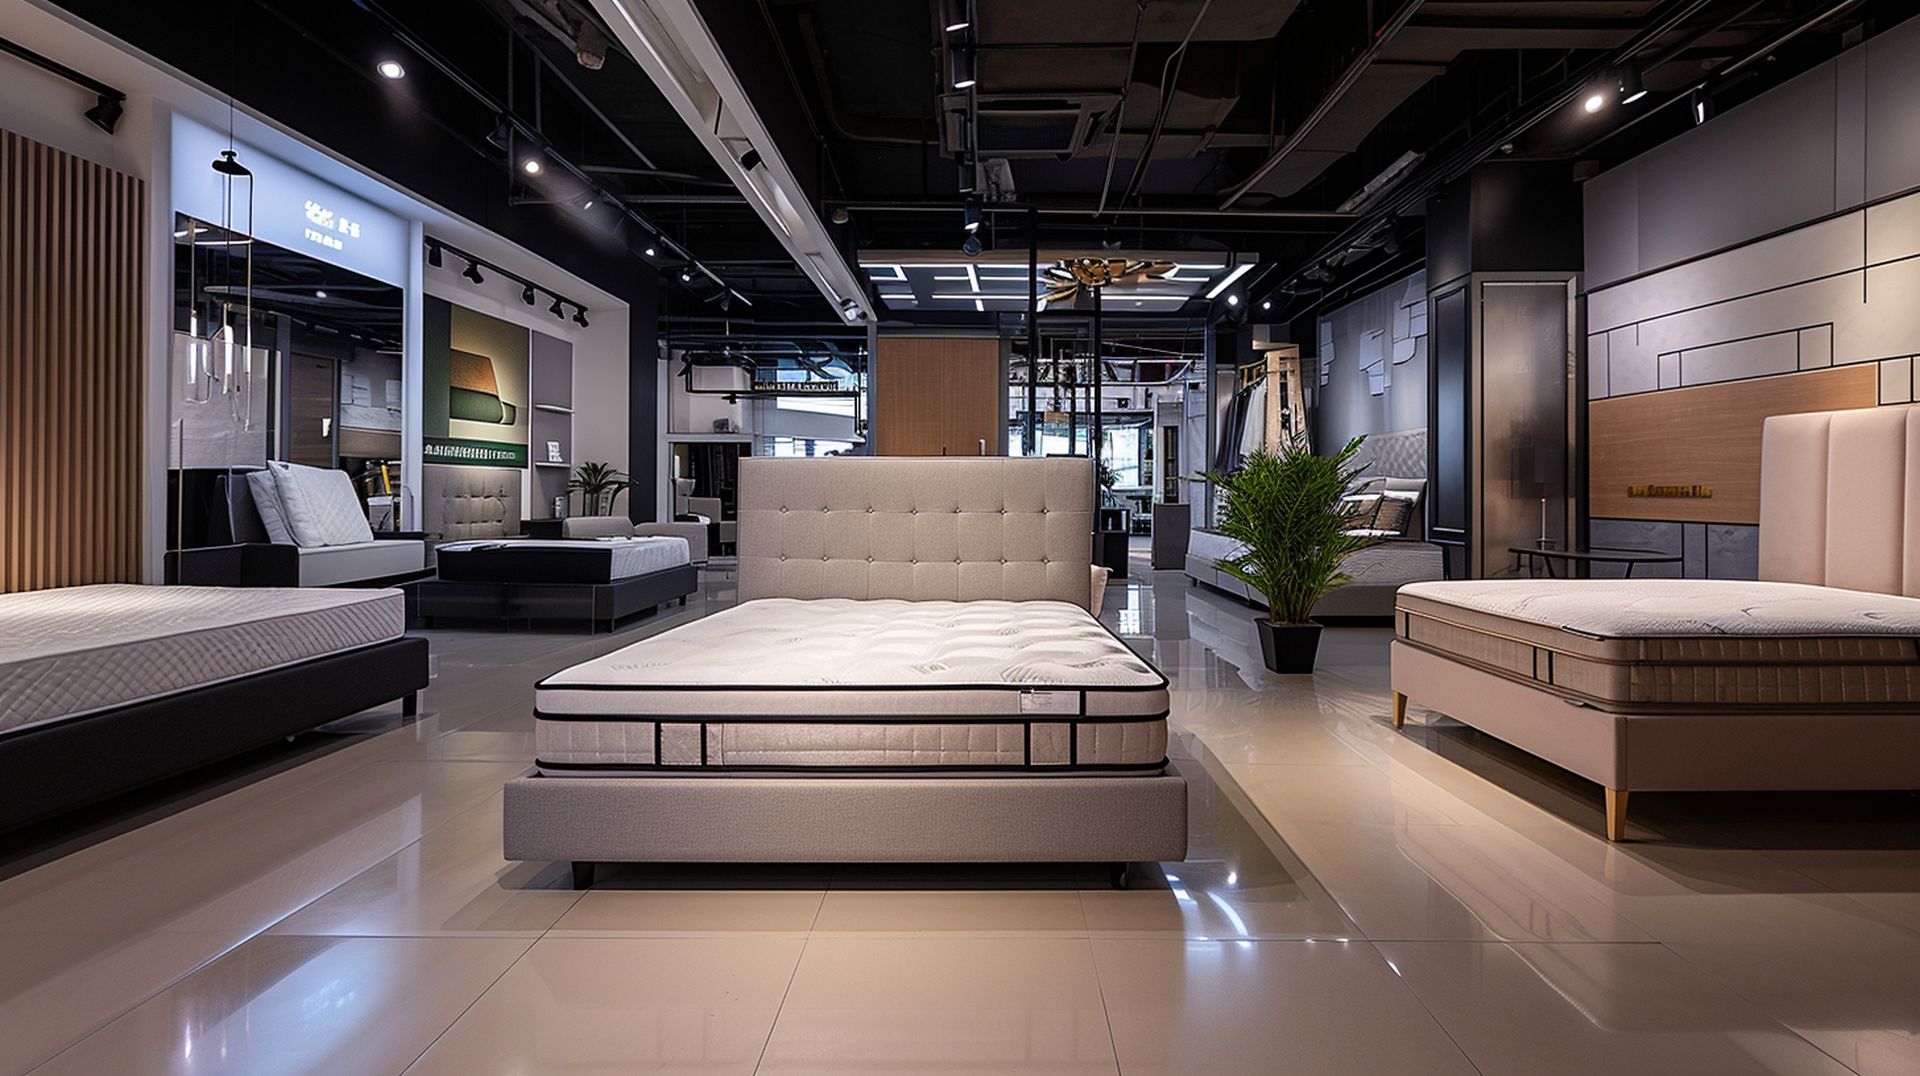 Local Tustin mattress stores have the best prices, sales, and deals if you're looking for a new mattress in Tustin